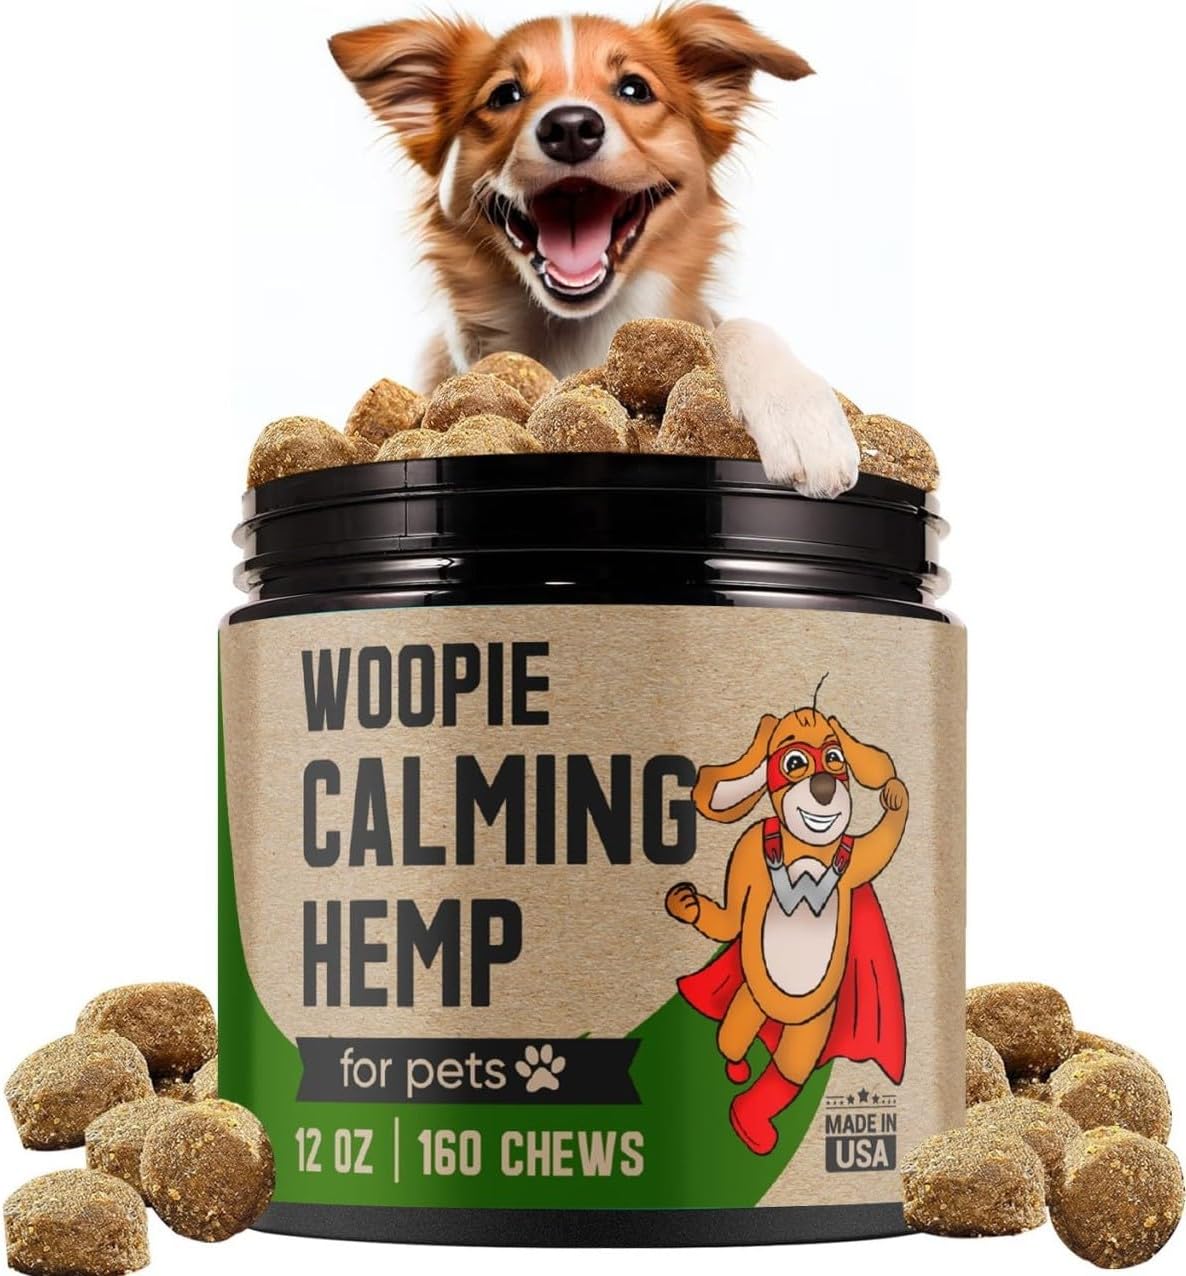 Calming Hemp Treats - for Dogs and Puppy Essentials for restful Sleep aid, Relief Stress for Attacks of Aggression pet - with melatonin, Easy Chews Toys, Made in USA